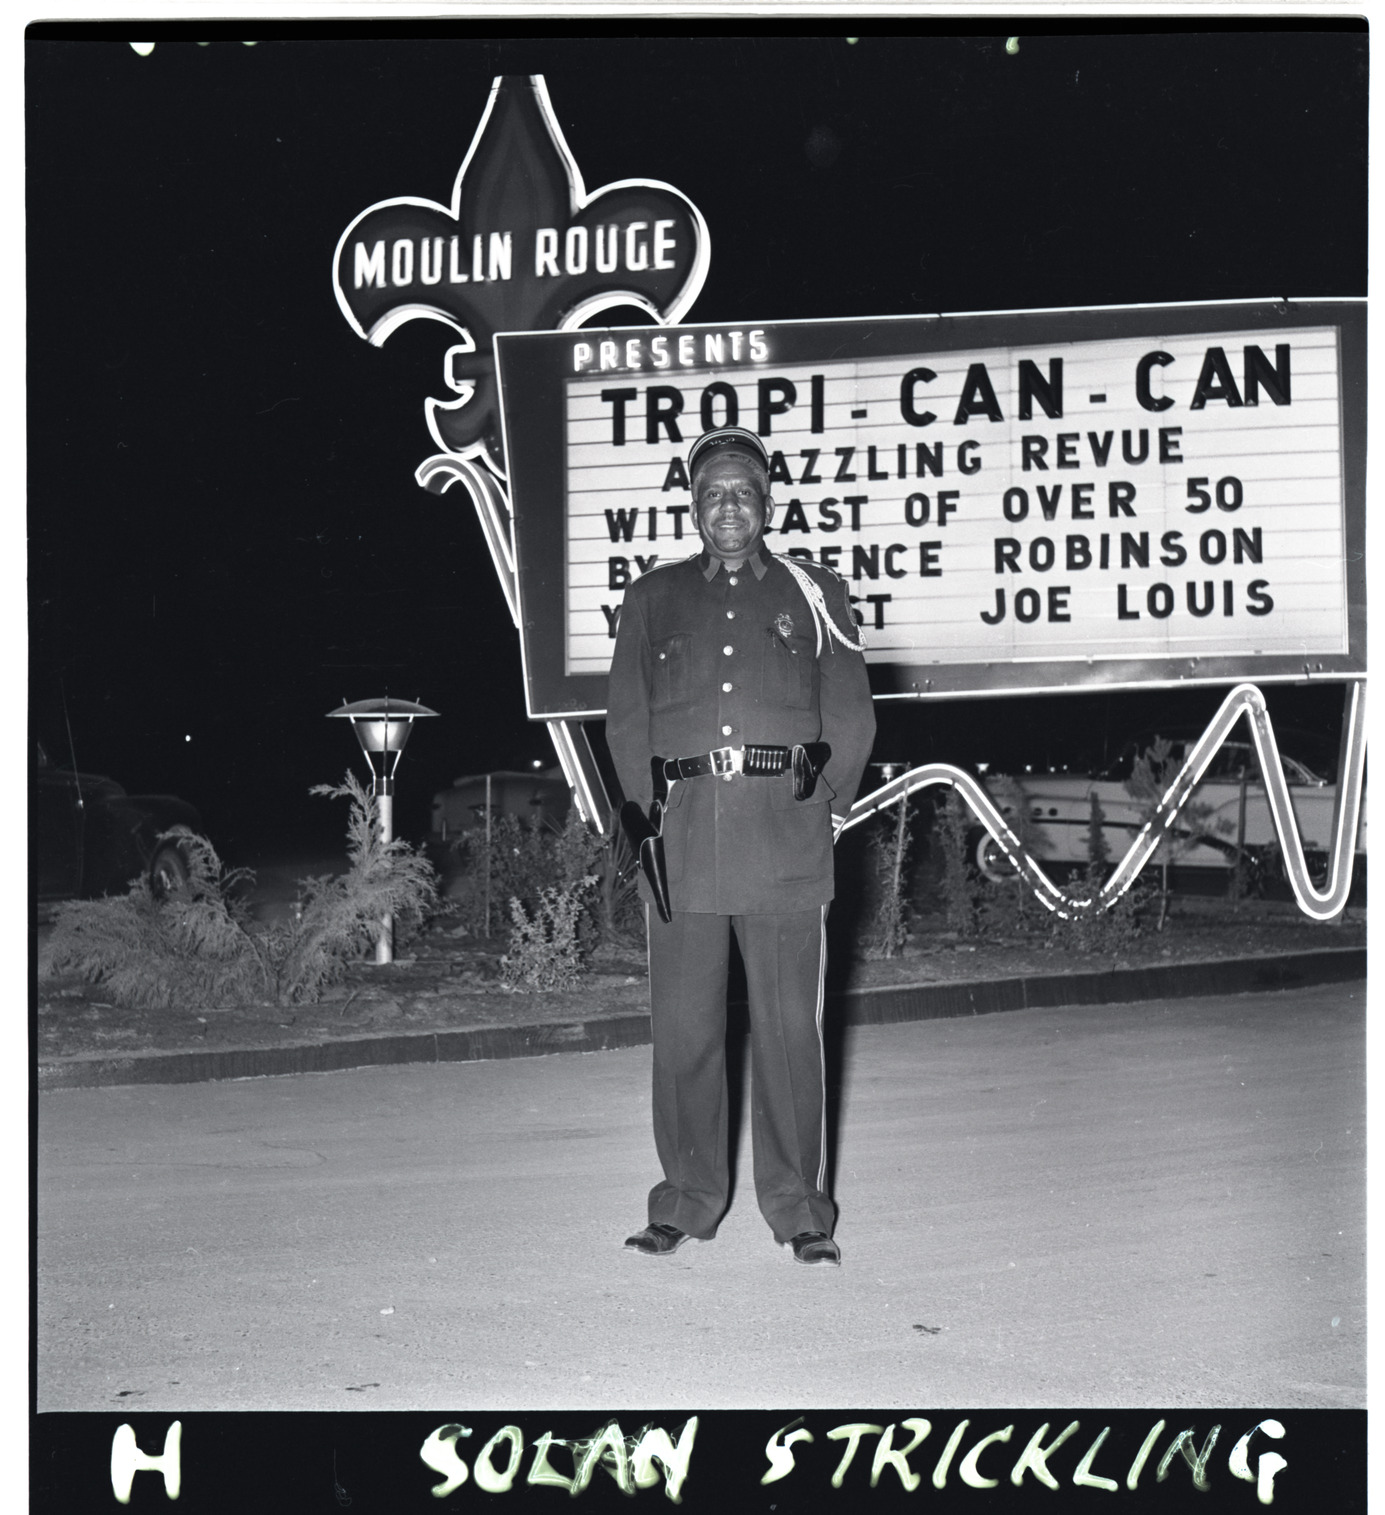 Marquee, Image 02